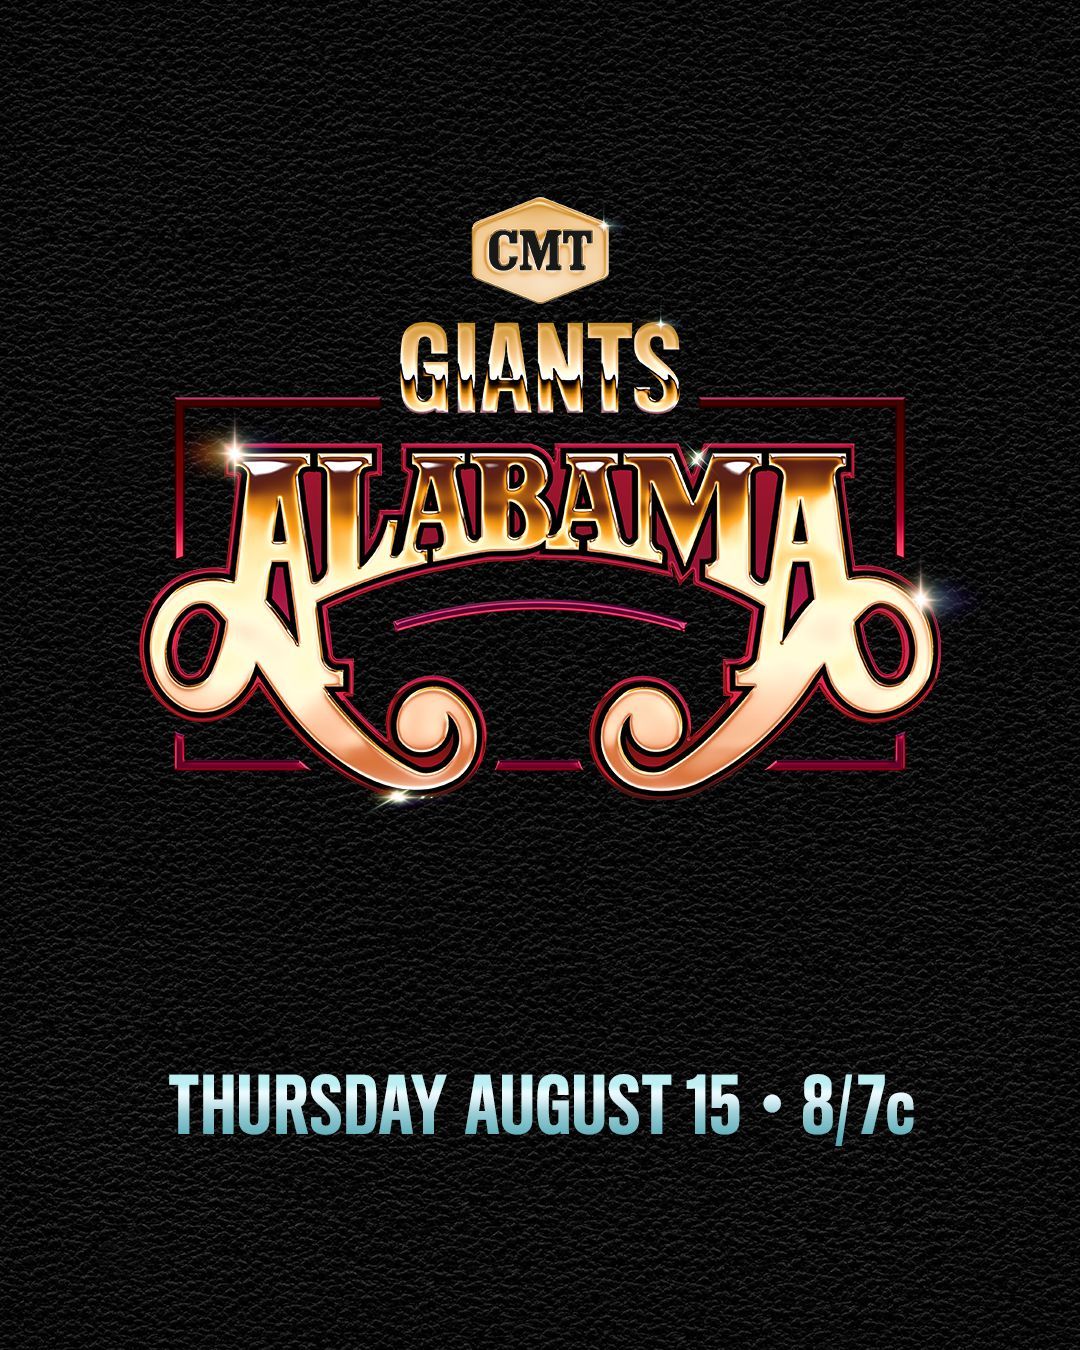 “CMT GIANTS: ALABAMA” to air Thursday, August 15th at 8p/7c